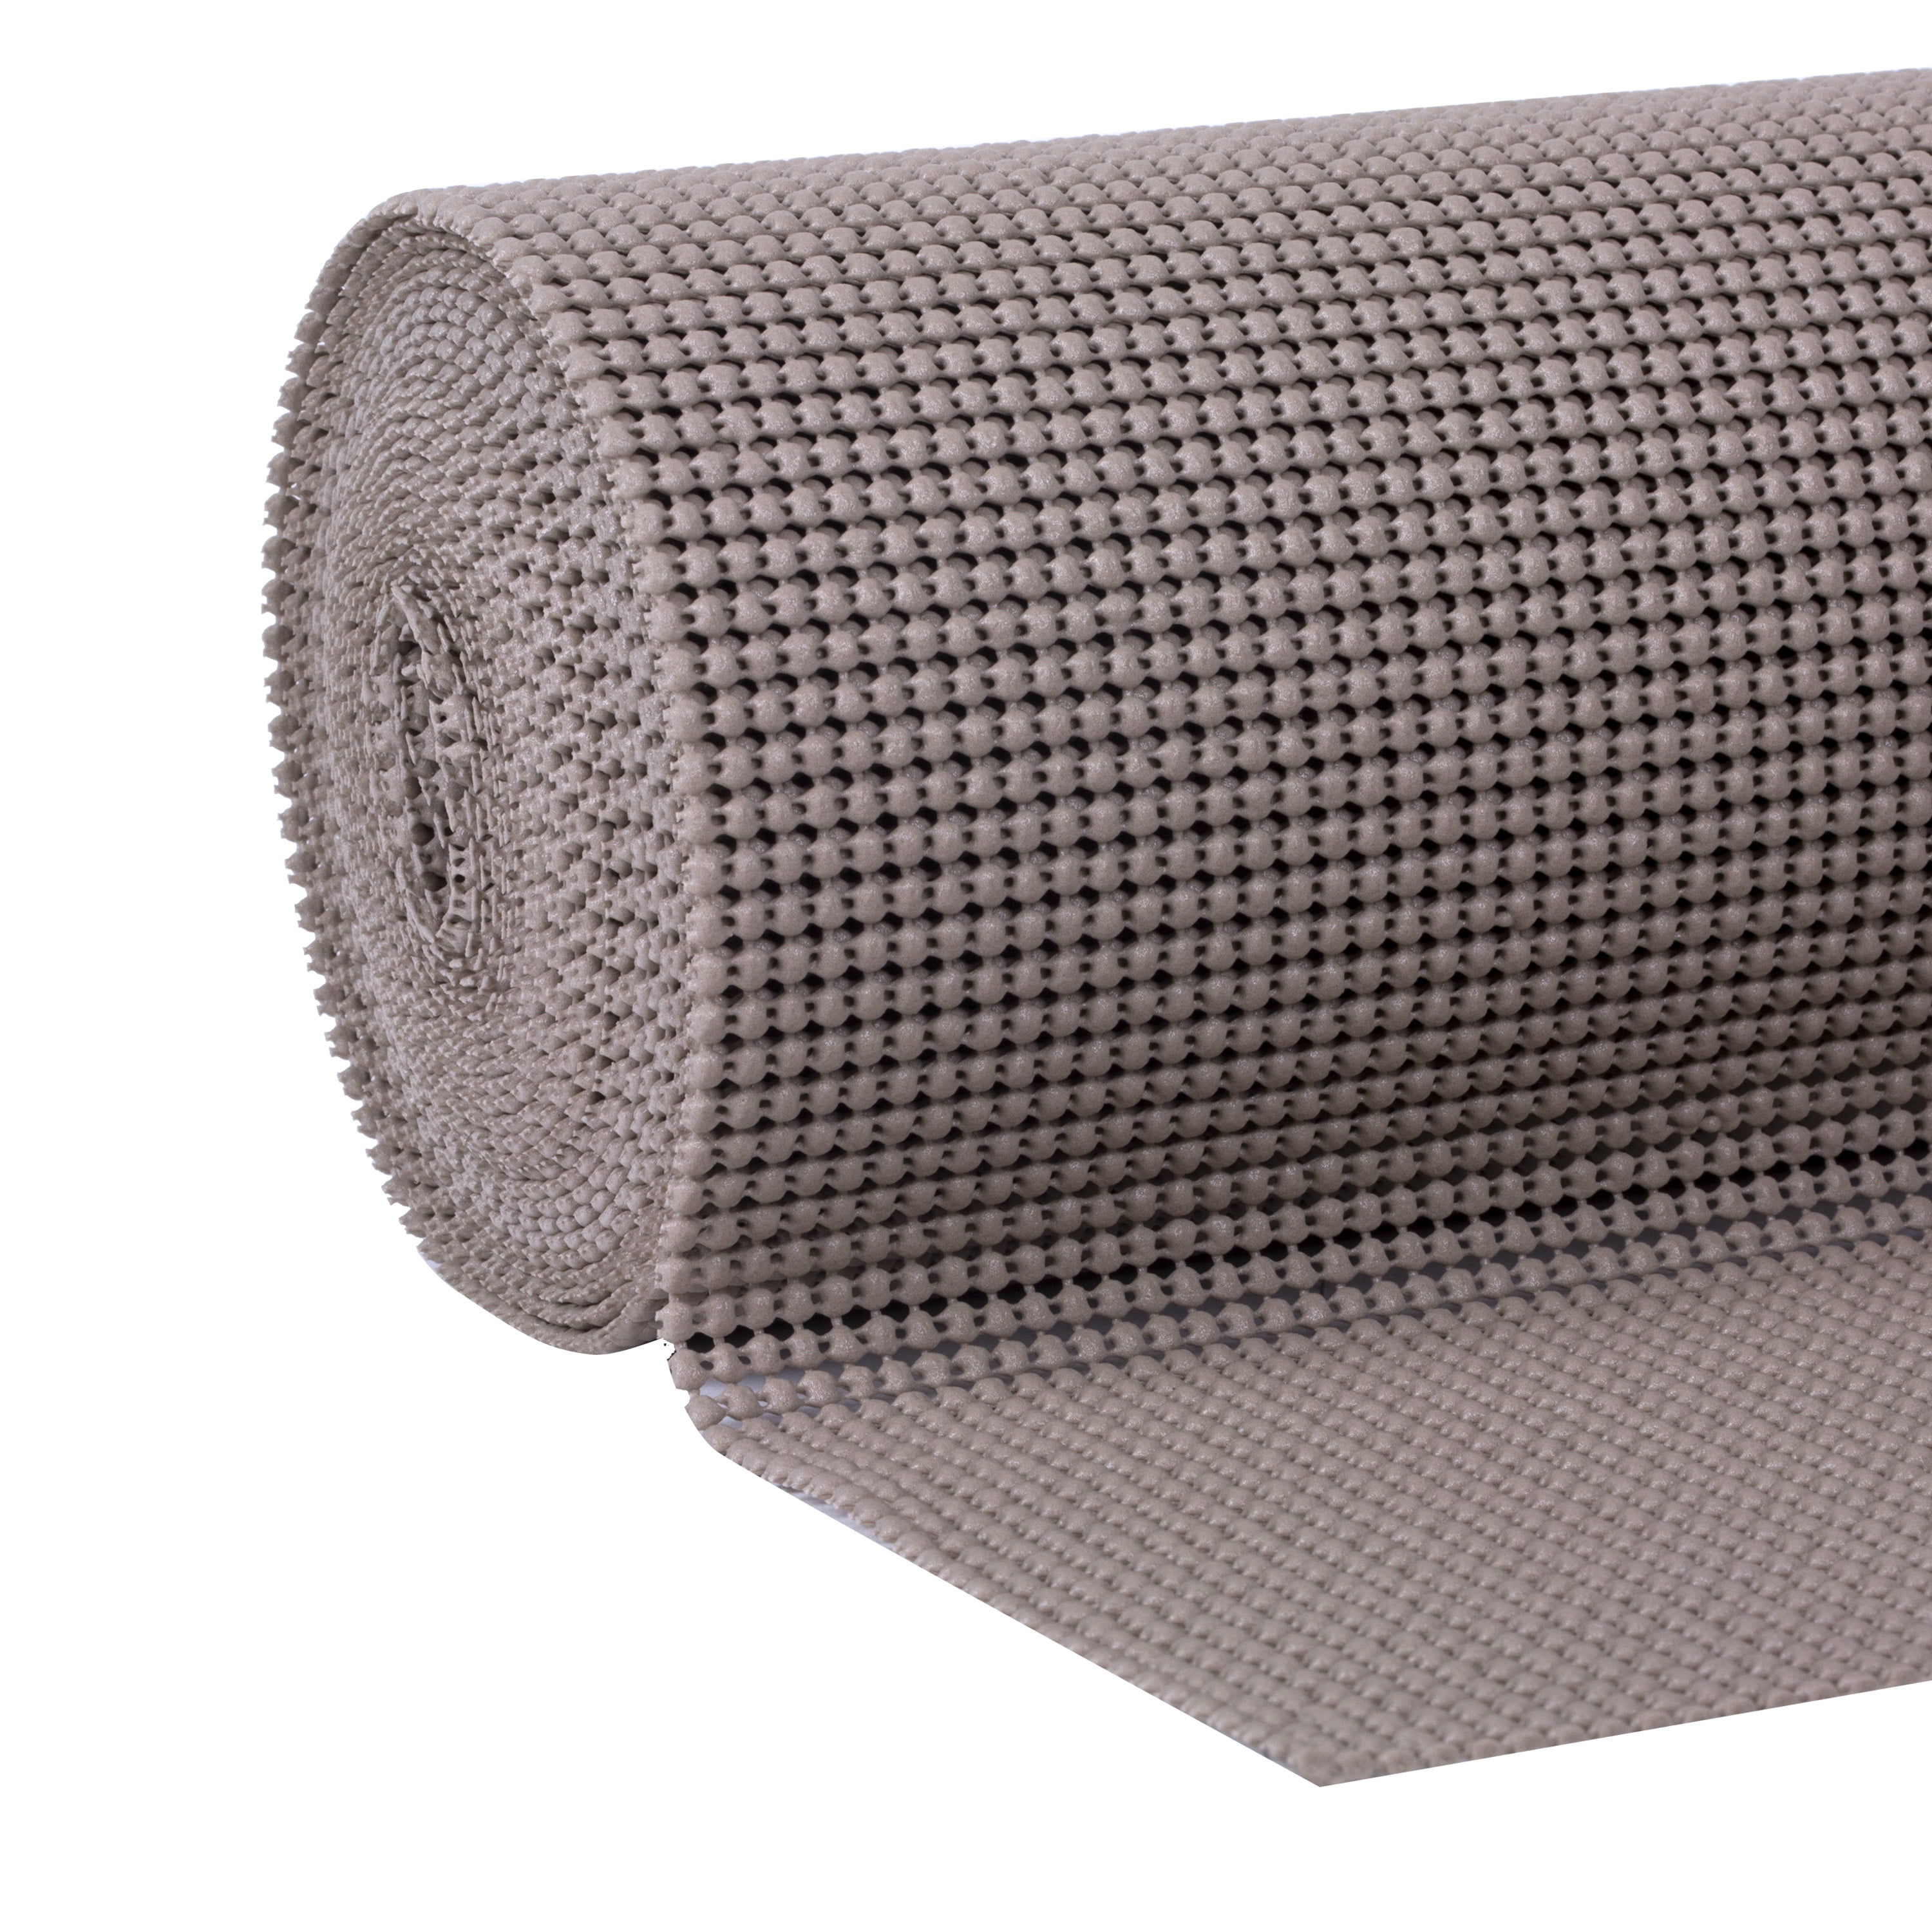 EasyLiner Select Grip 20 in. x 18 ft. Shelf Liner, Taupe